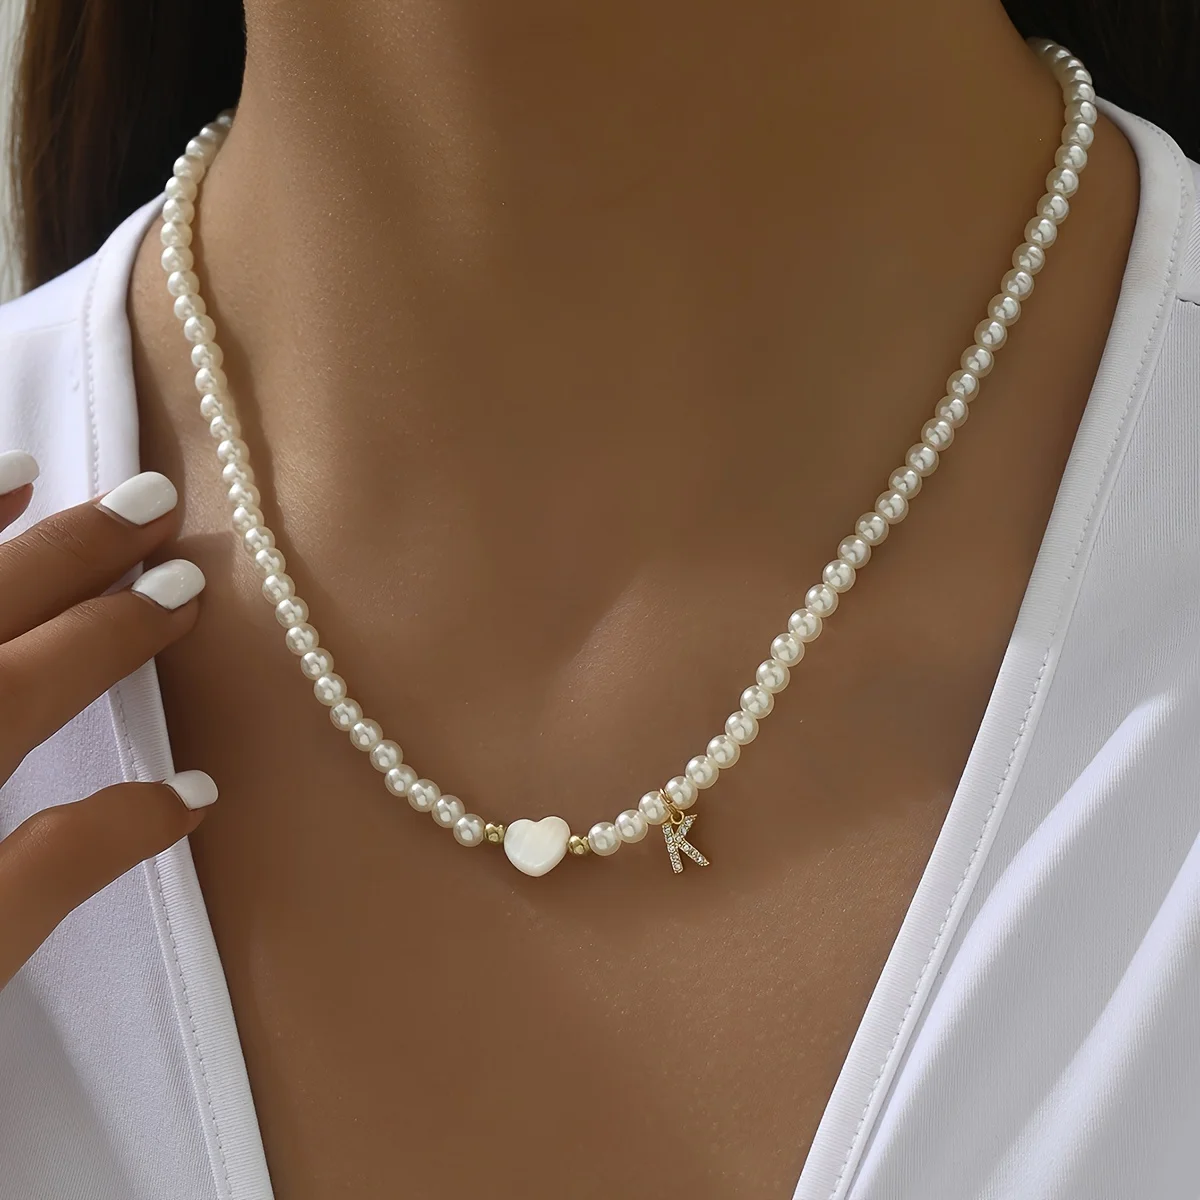 Dropship Faux Pearls Beads Necklace Heart Shape Pendant Lovely